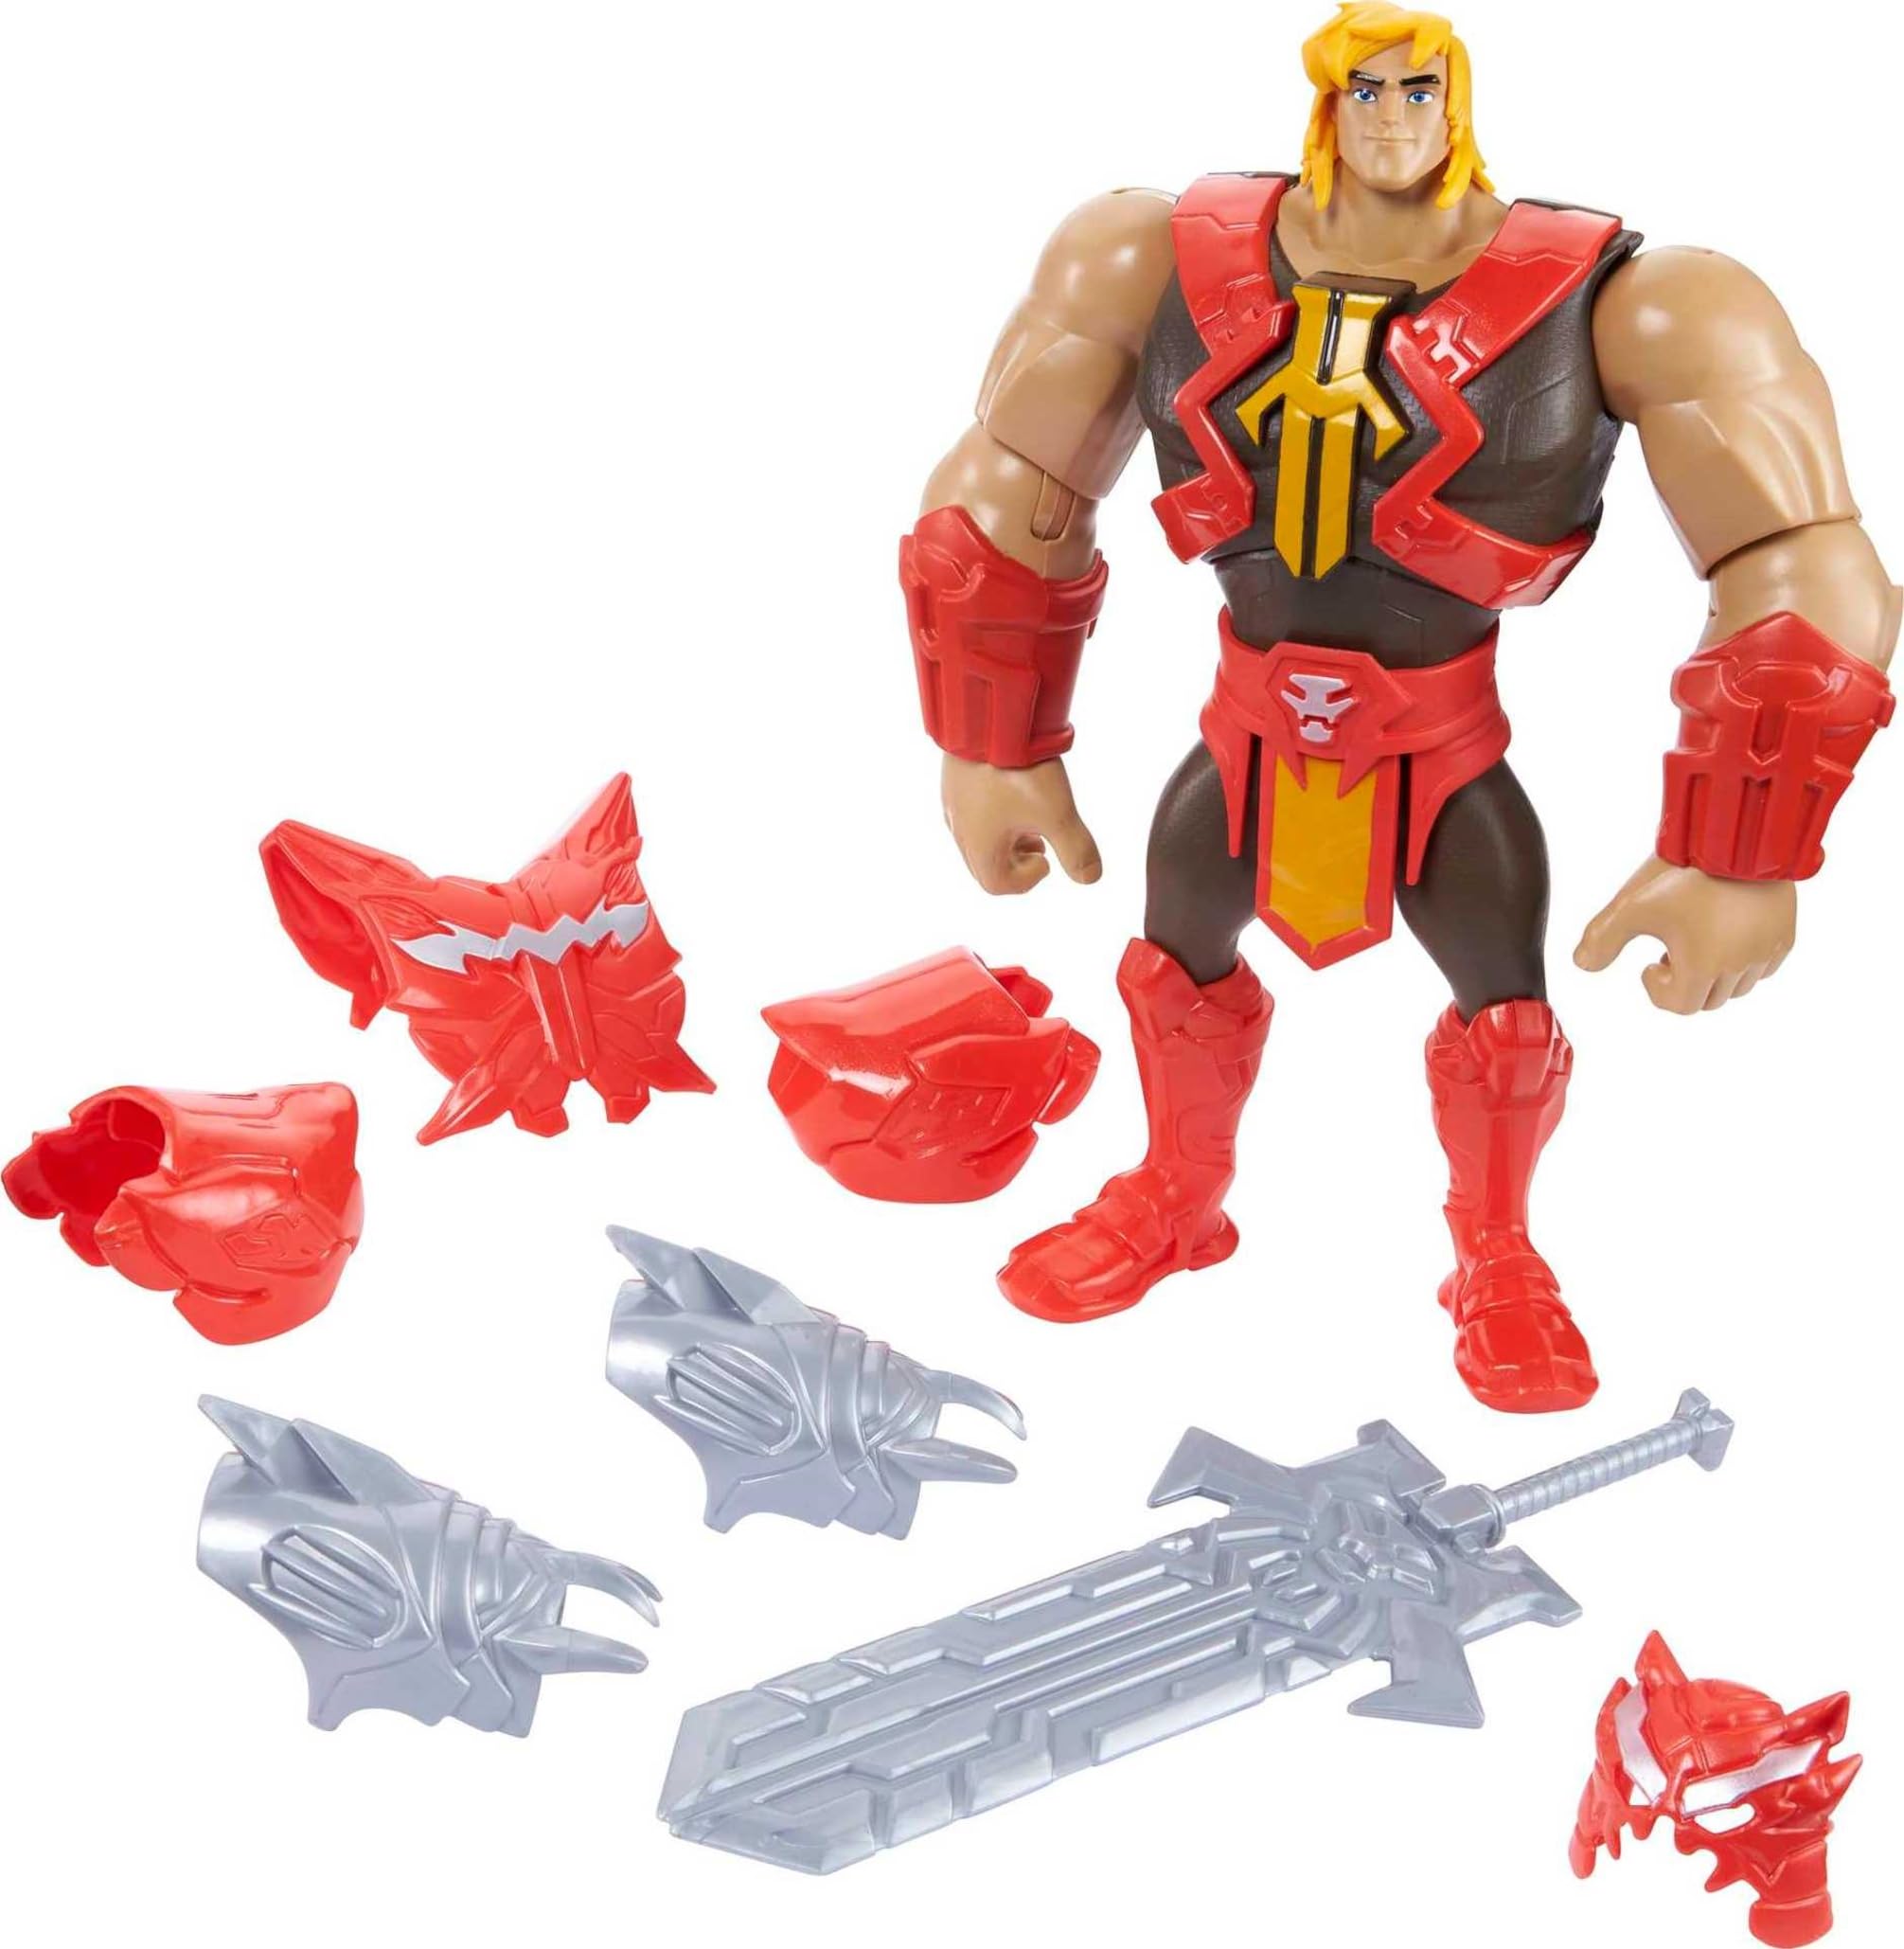 8.5'' Masters of the Universe: Deluxe He-Man Power Action Figure w/ Accessories  $4 + Free Shipping w/ Walmart+ or on $35+